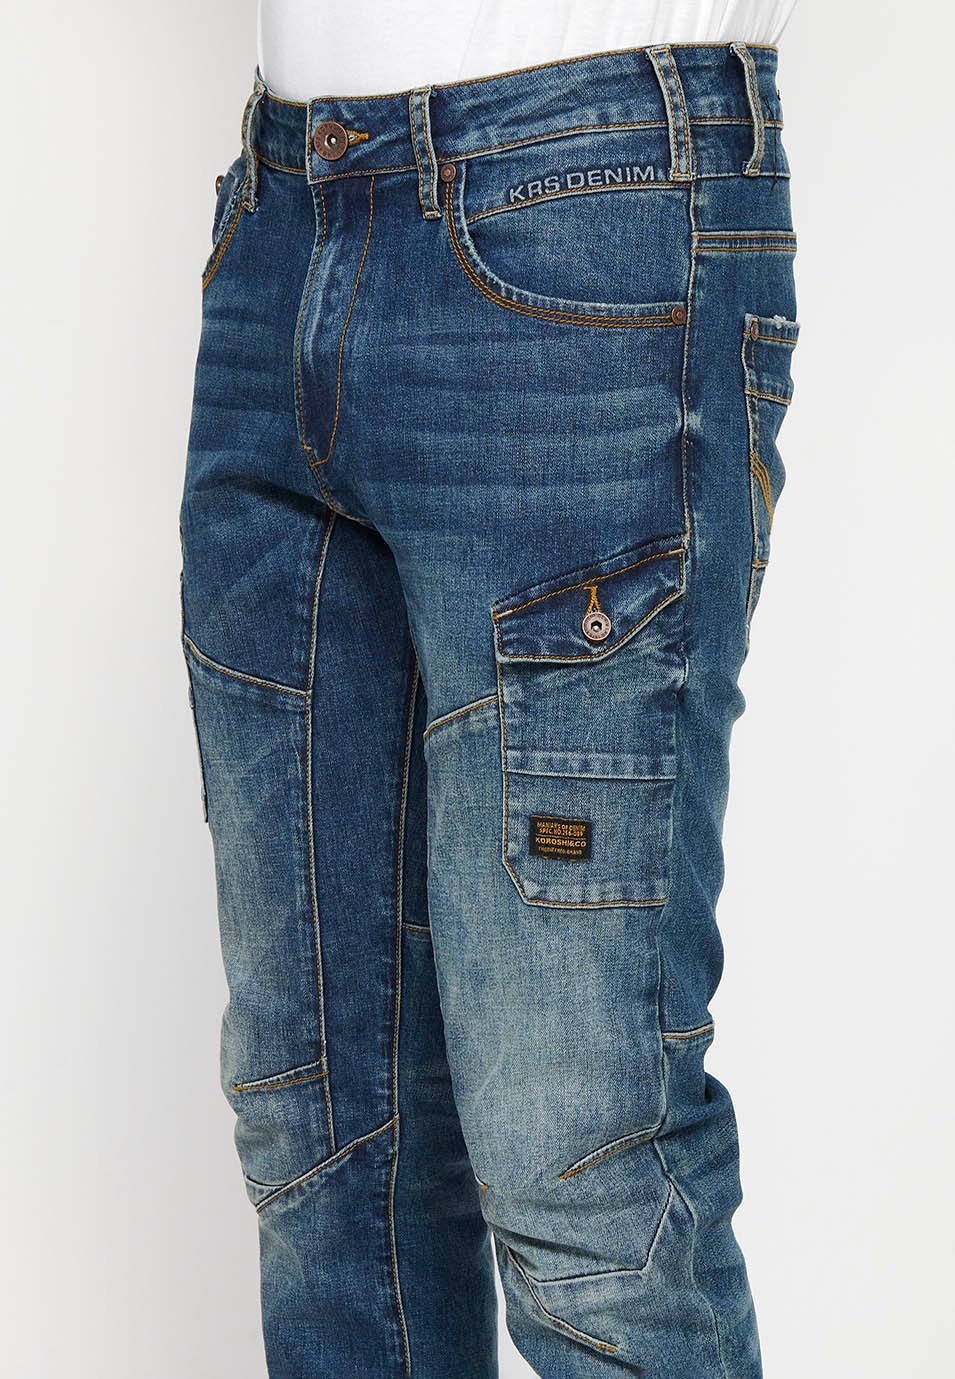 Regular fit workwear cargo denim pants with front zipper and button closure with side pockets with flap in Blue for Men